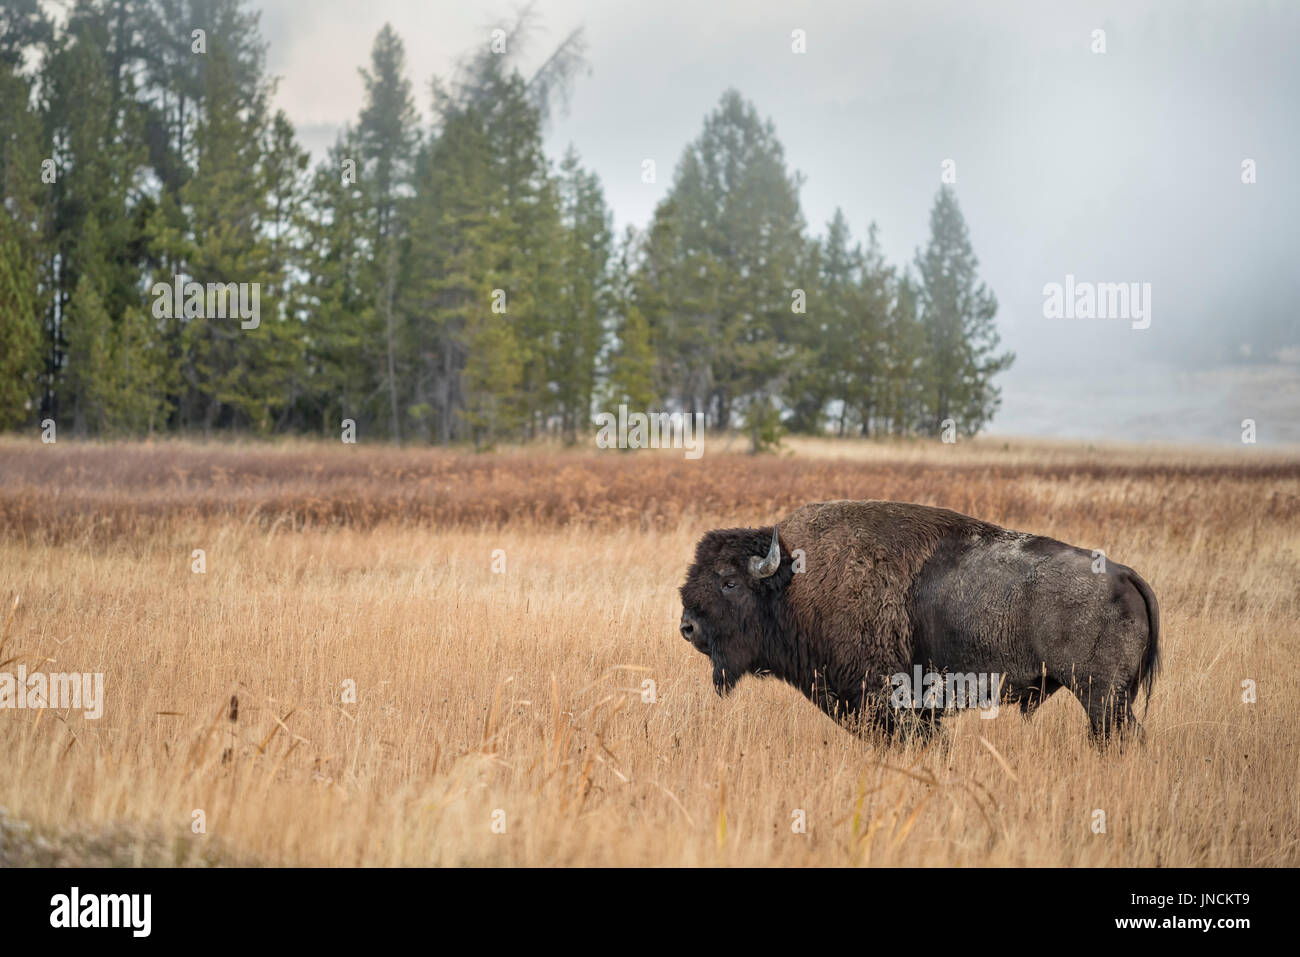 Bison at Upper Geyser Basin in Old Faithful, Yellowstone National Park, Wyoming. Stock Photo